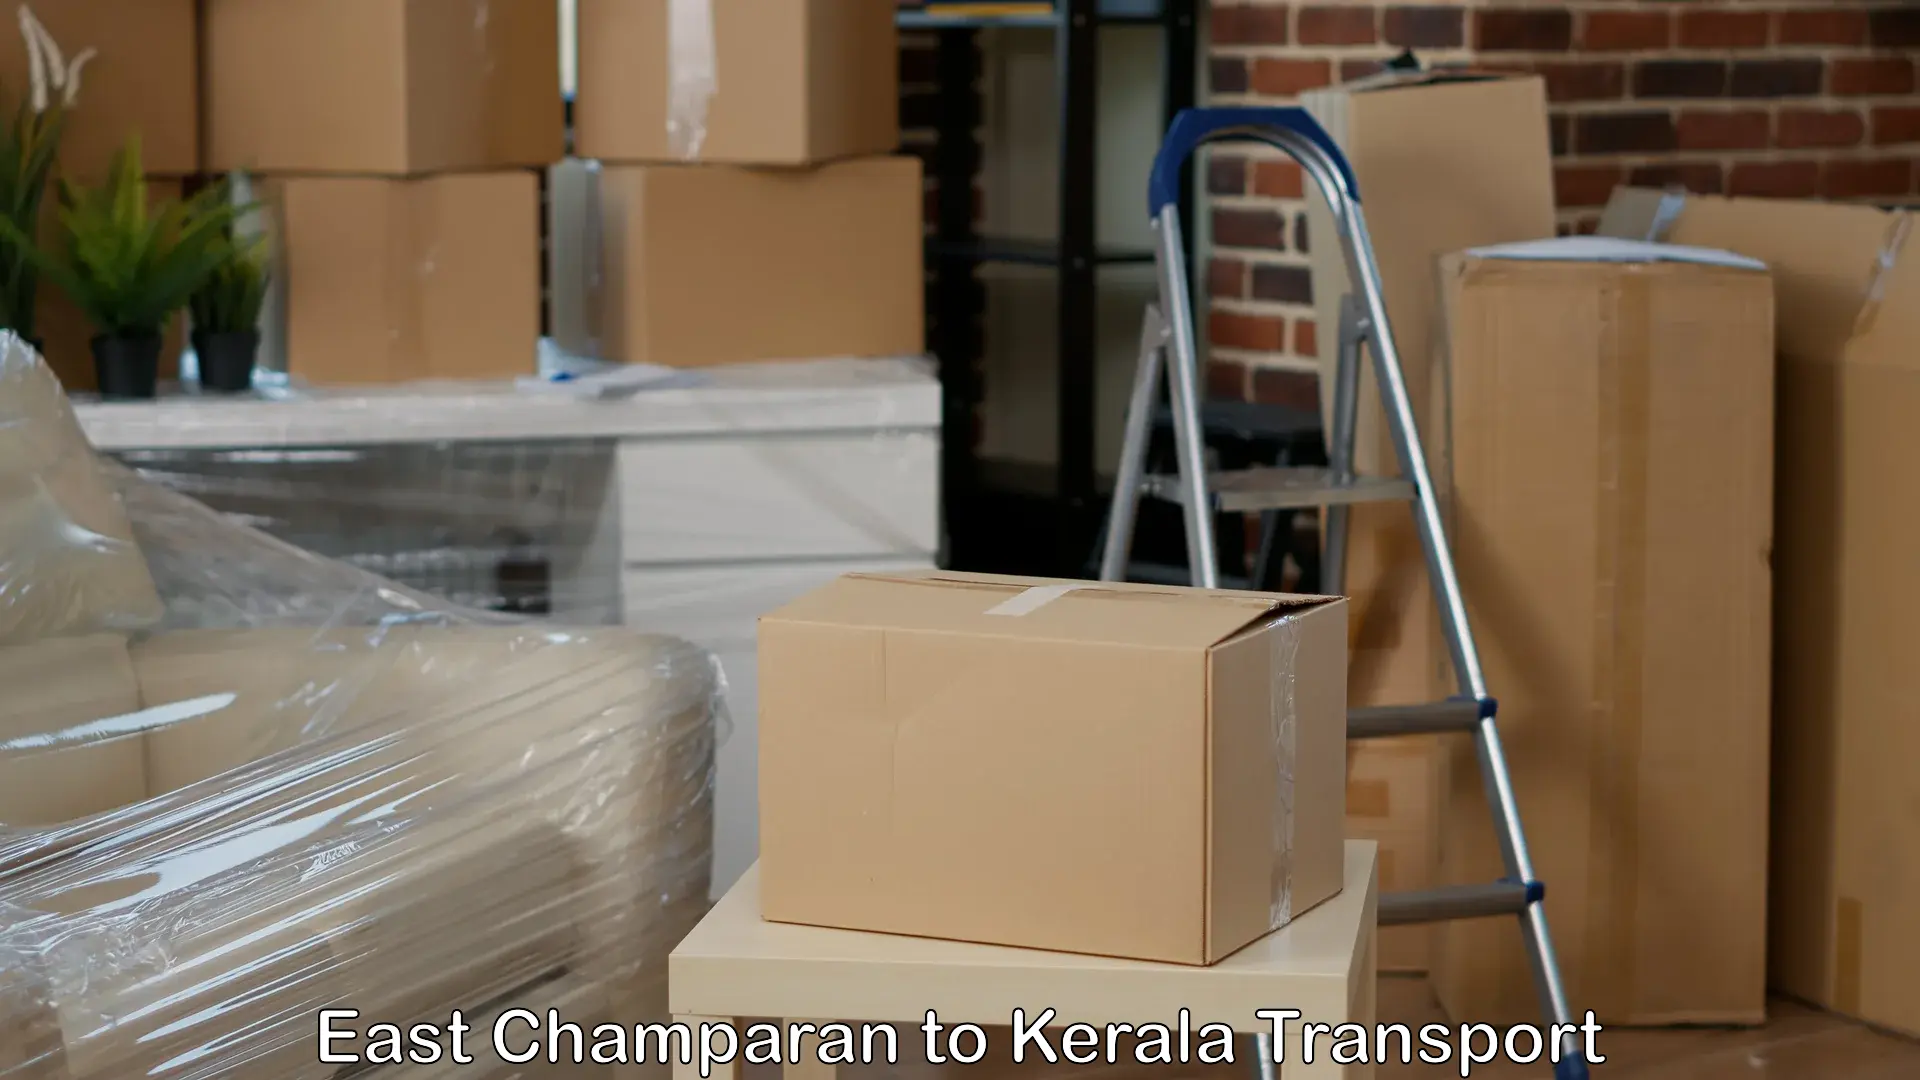 Commercial transport service East Champaran to Manjeri